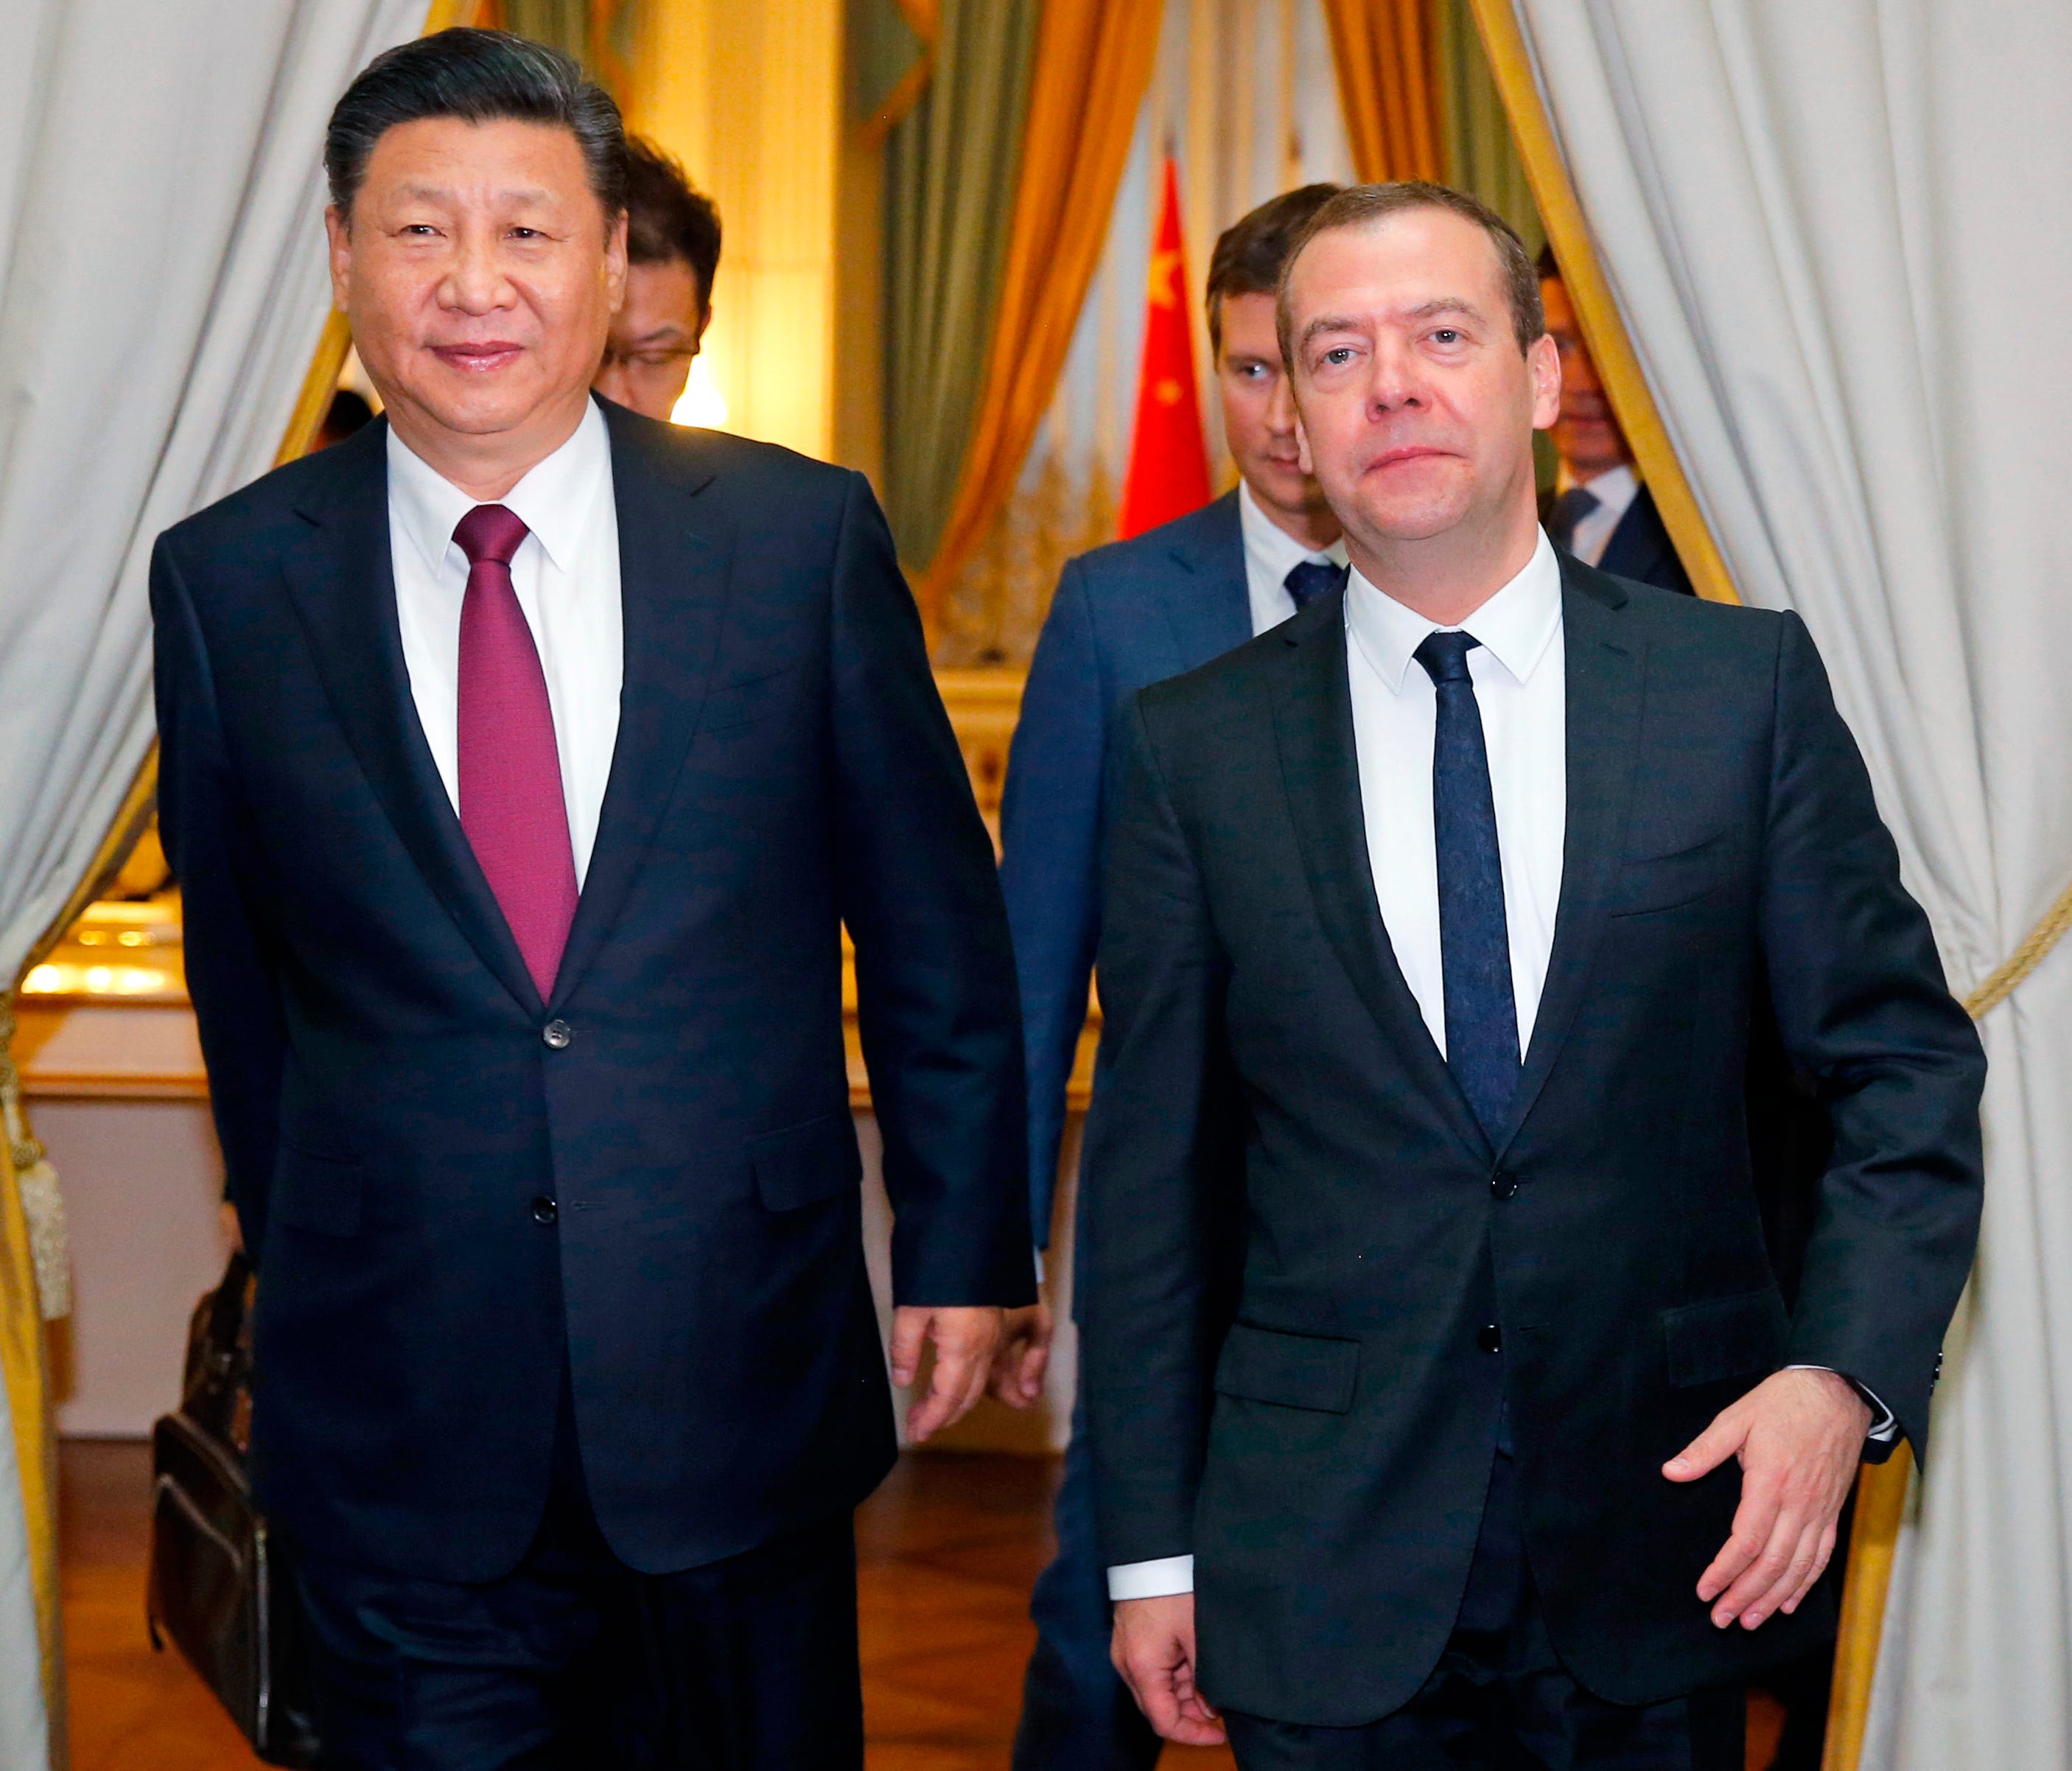 Chinese President Xi Jinping, left, and Russian Prime Minister Dmitry Medvedev walk together prior talks in Moscow, Russia, Tuesday, July 4, 2017.